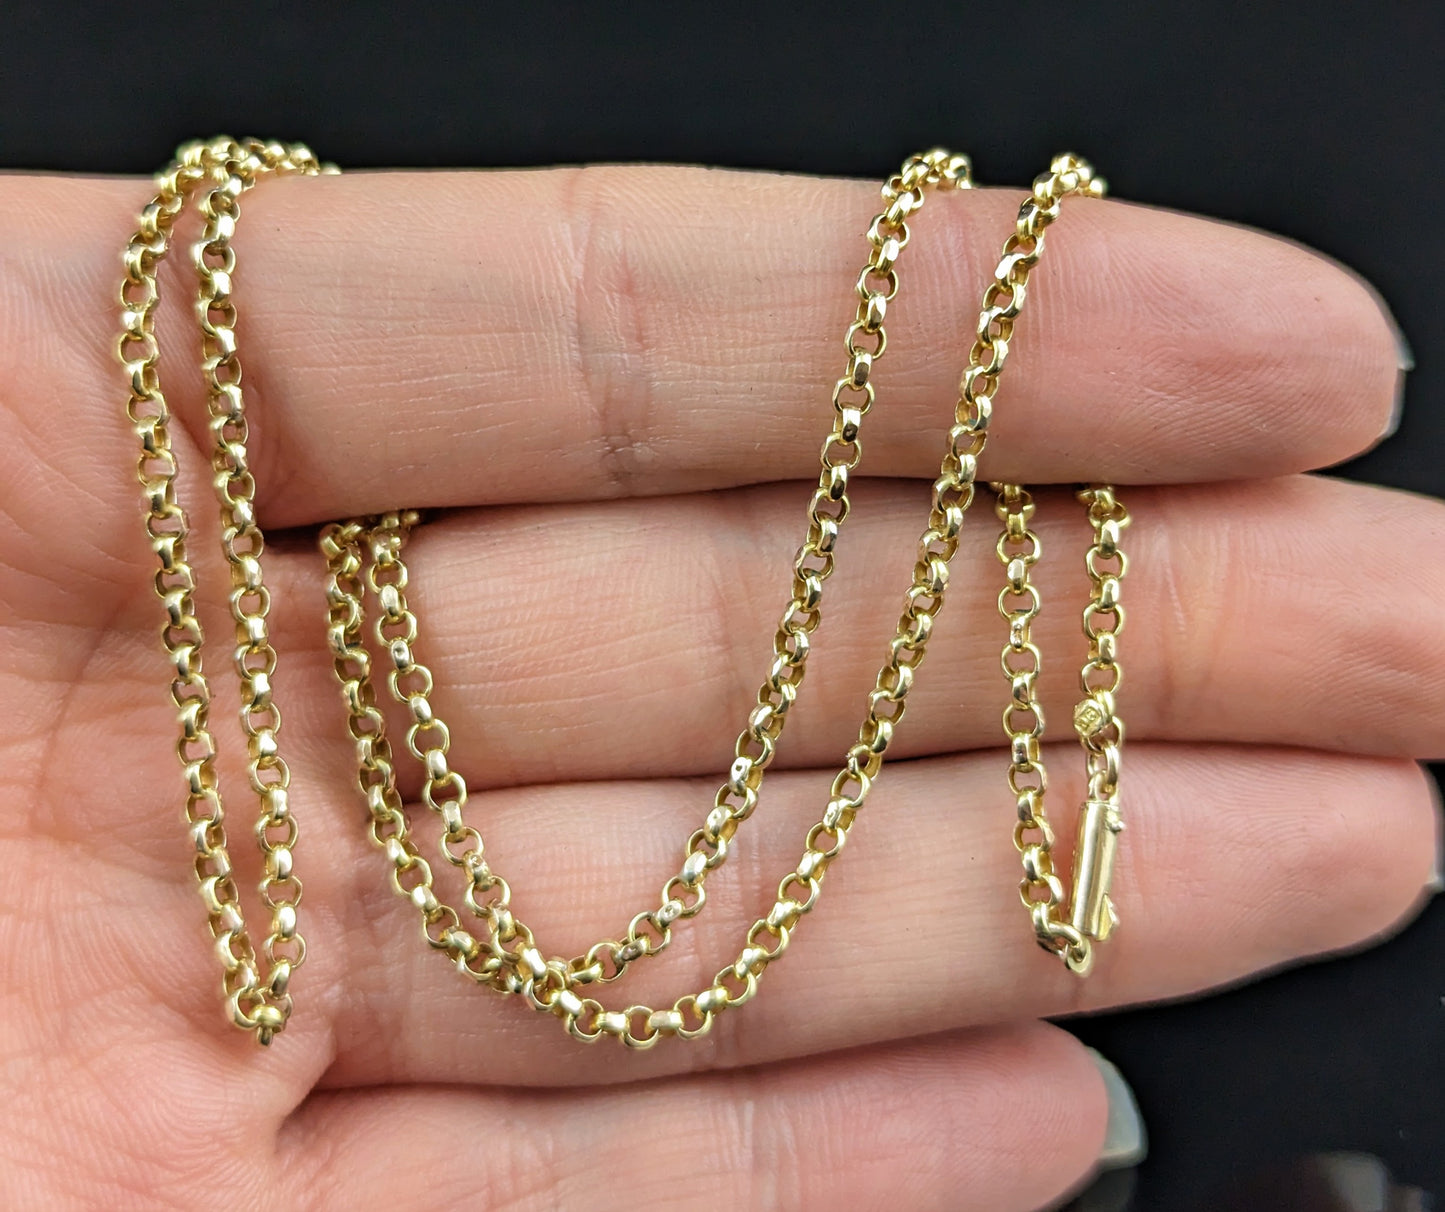 Antique 9ct yellow gold Belcher link chain necklace